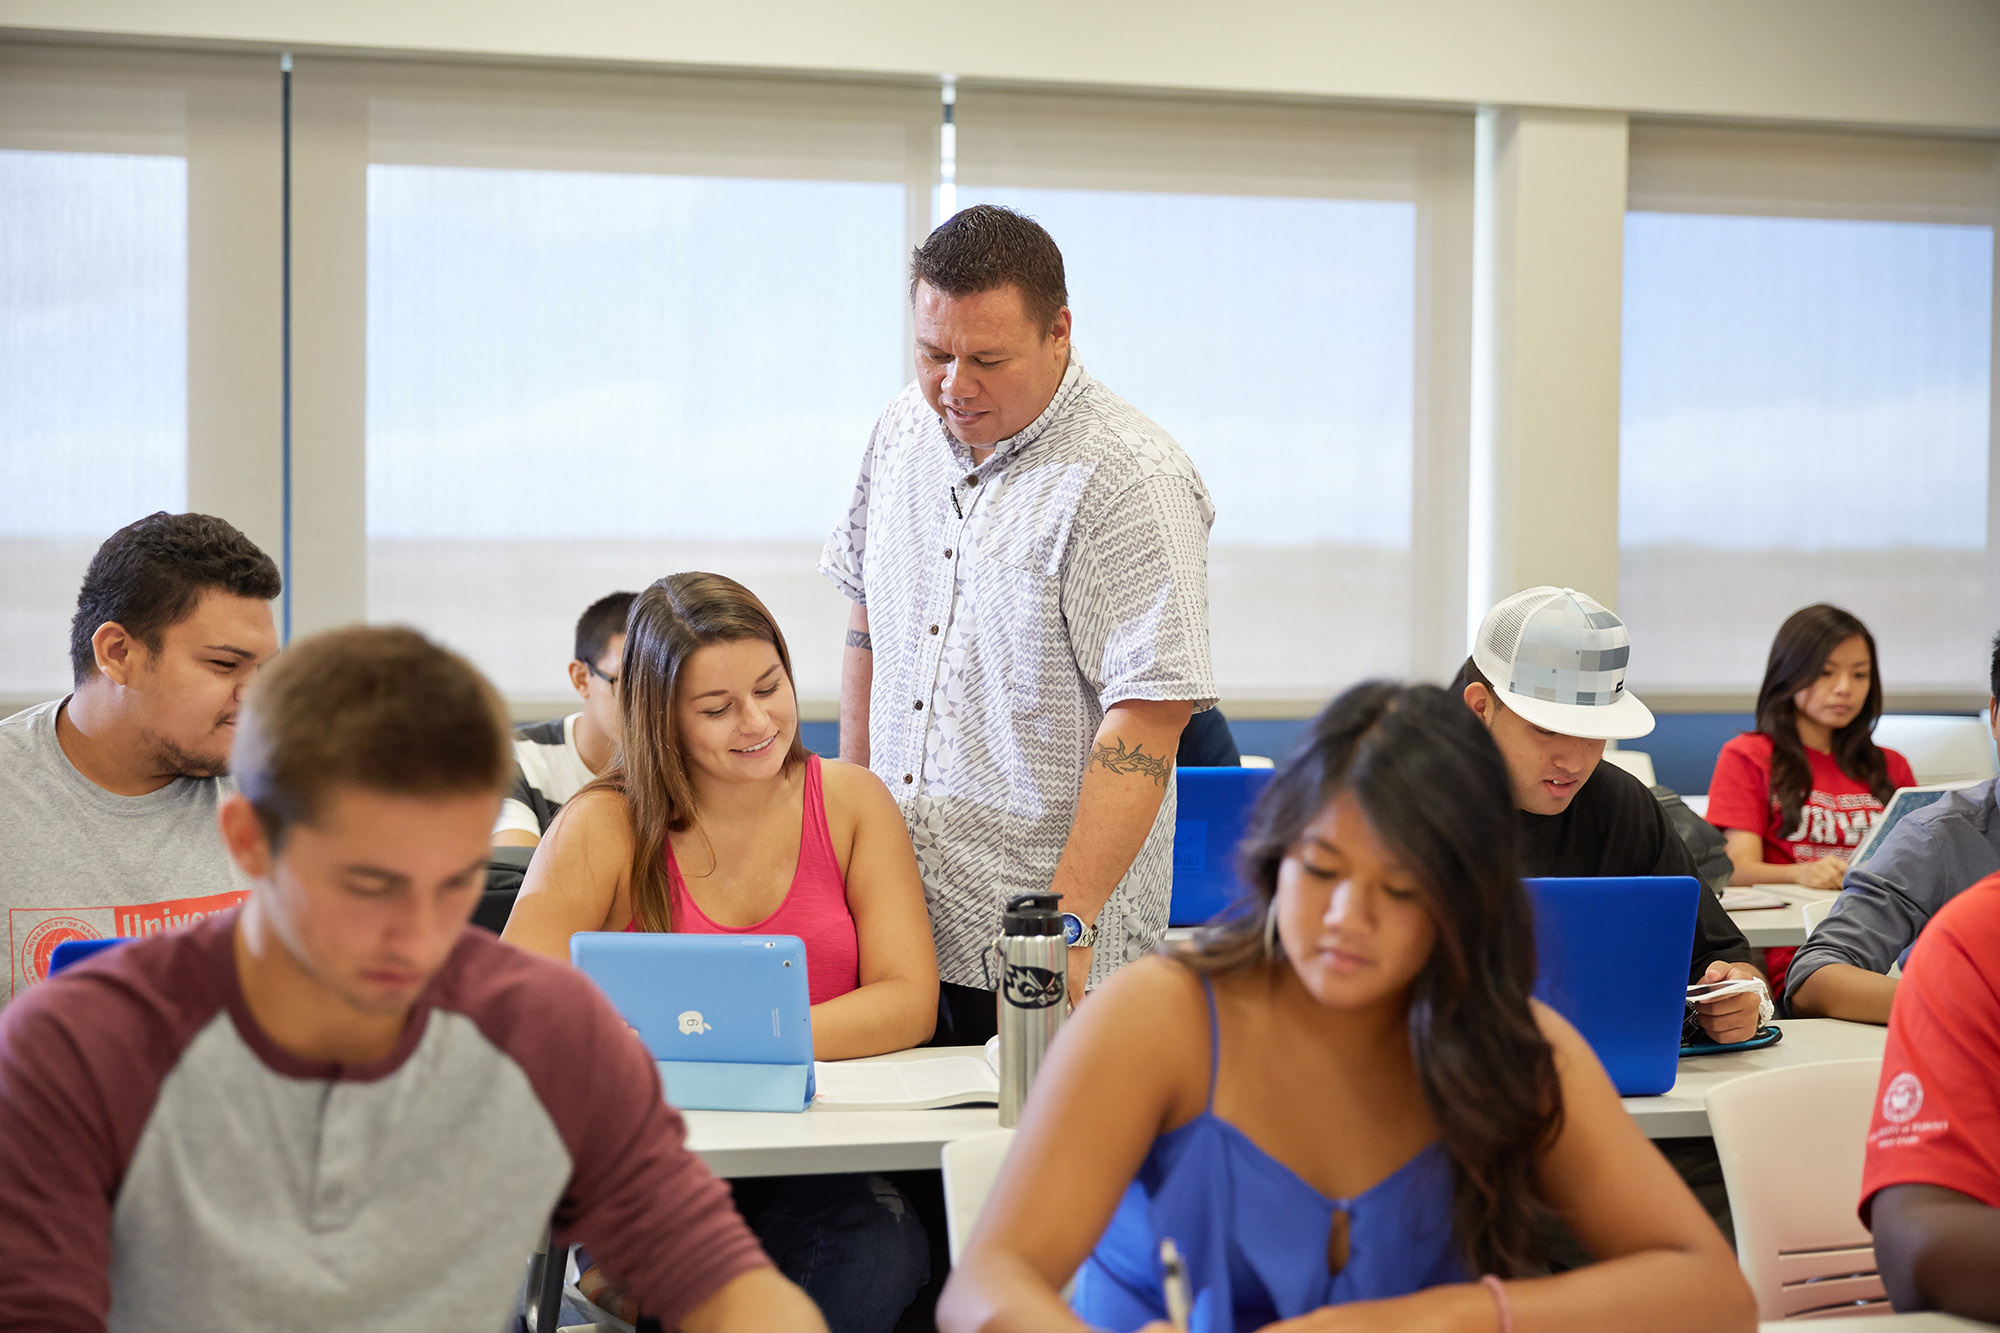 Professor standing in the middle of classroom, looking over student's shoulder.